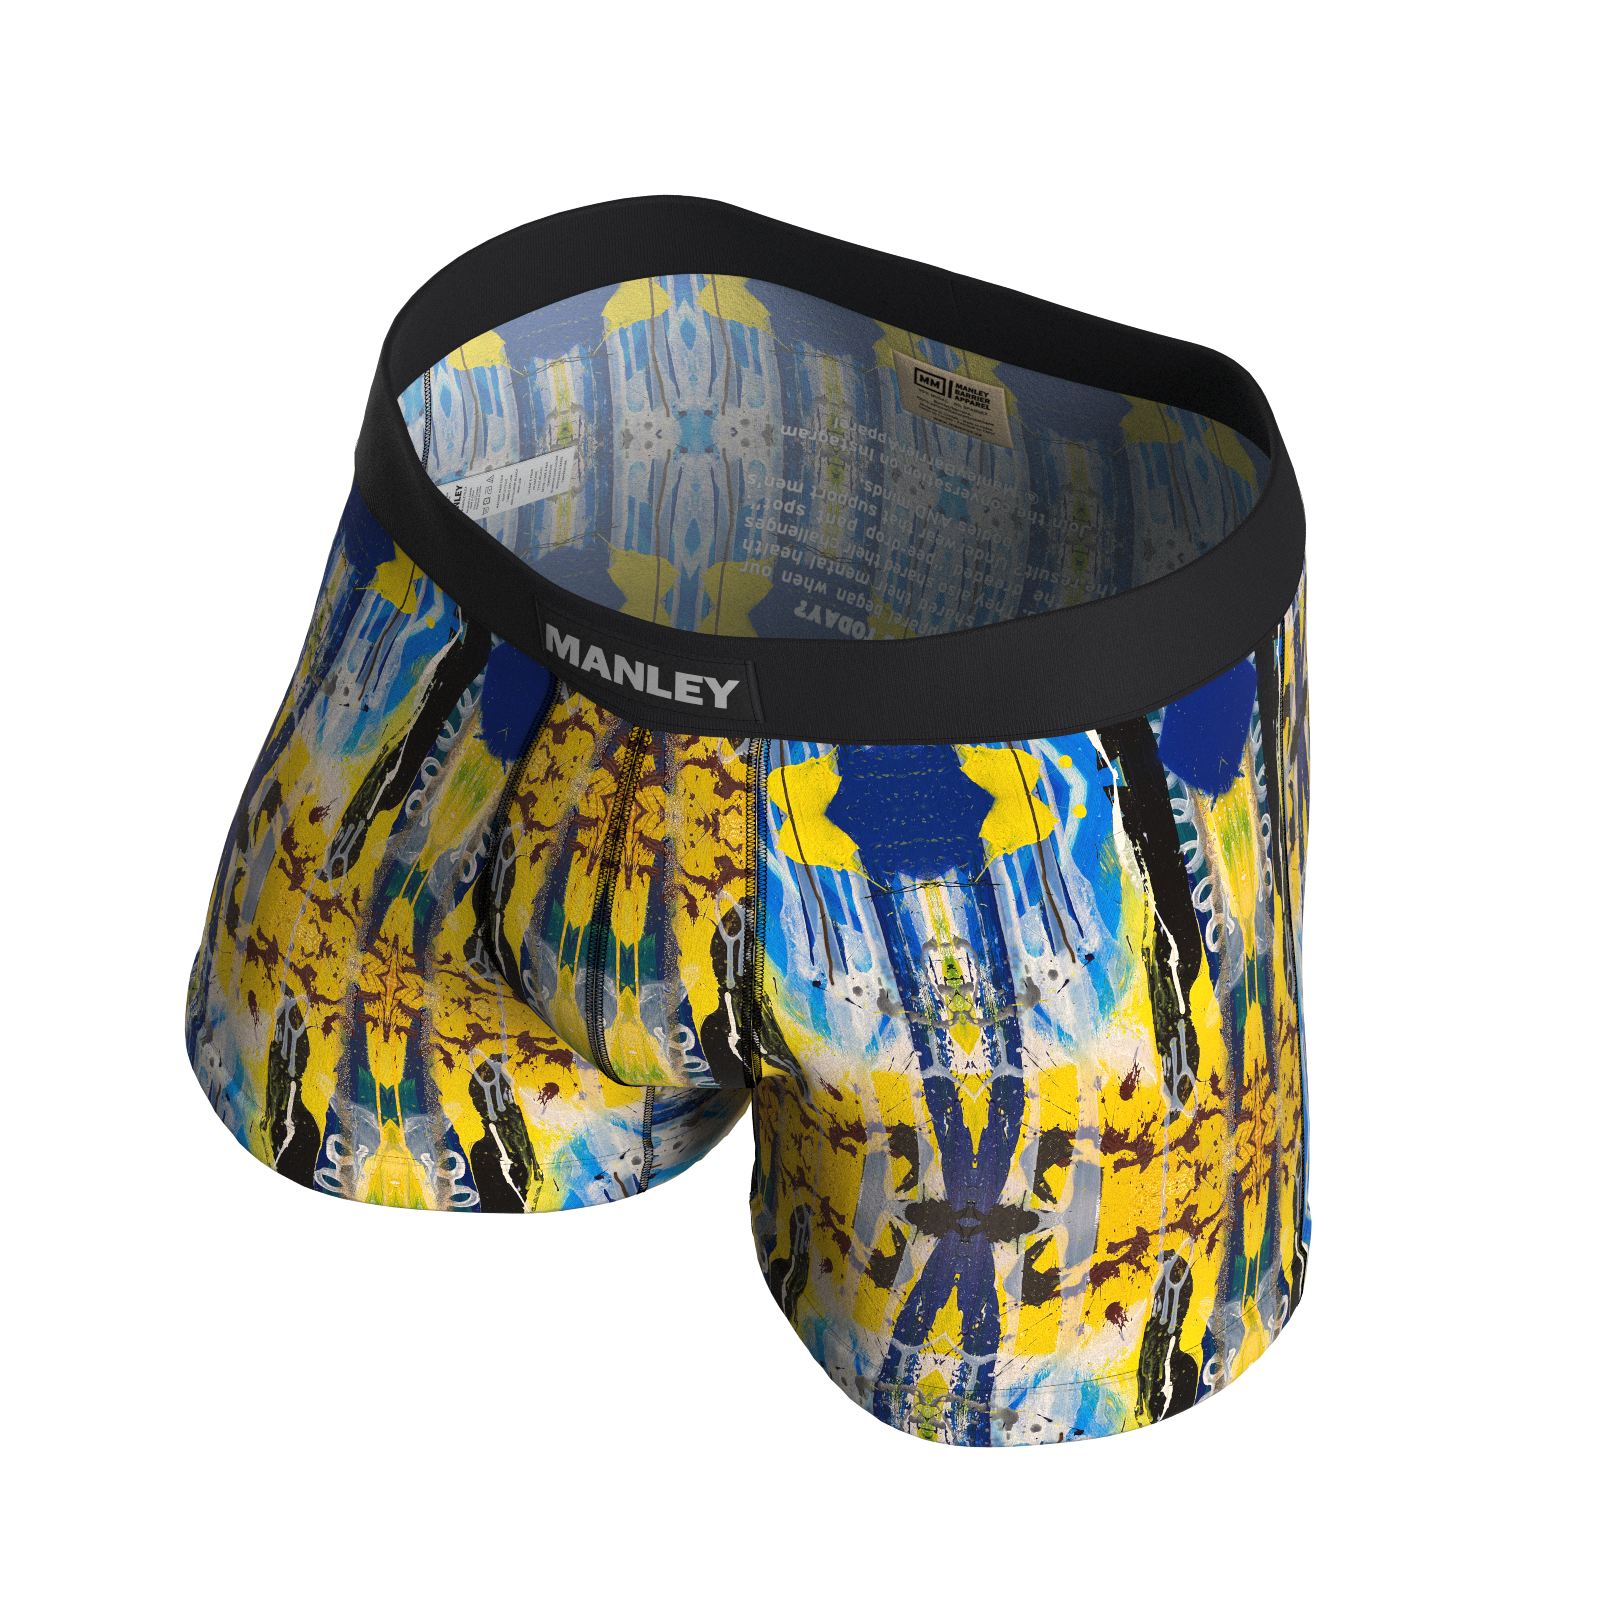 Manley Hello! Yellow boxer briefs, designed by artist Anthony Ricciardi, abstract design in blue, yellow, black, and white. Manley Barrier Technology that stops the pee spot. Feel manly in Manley.Stop the Pee Spot.  